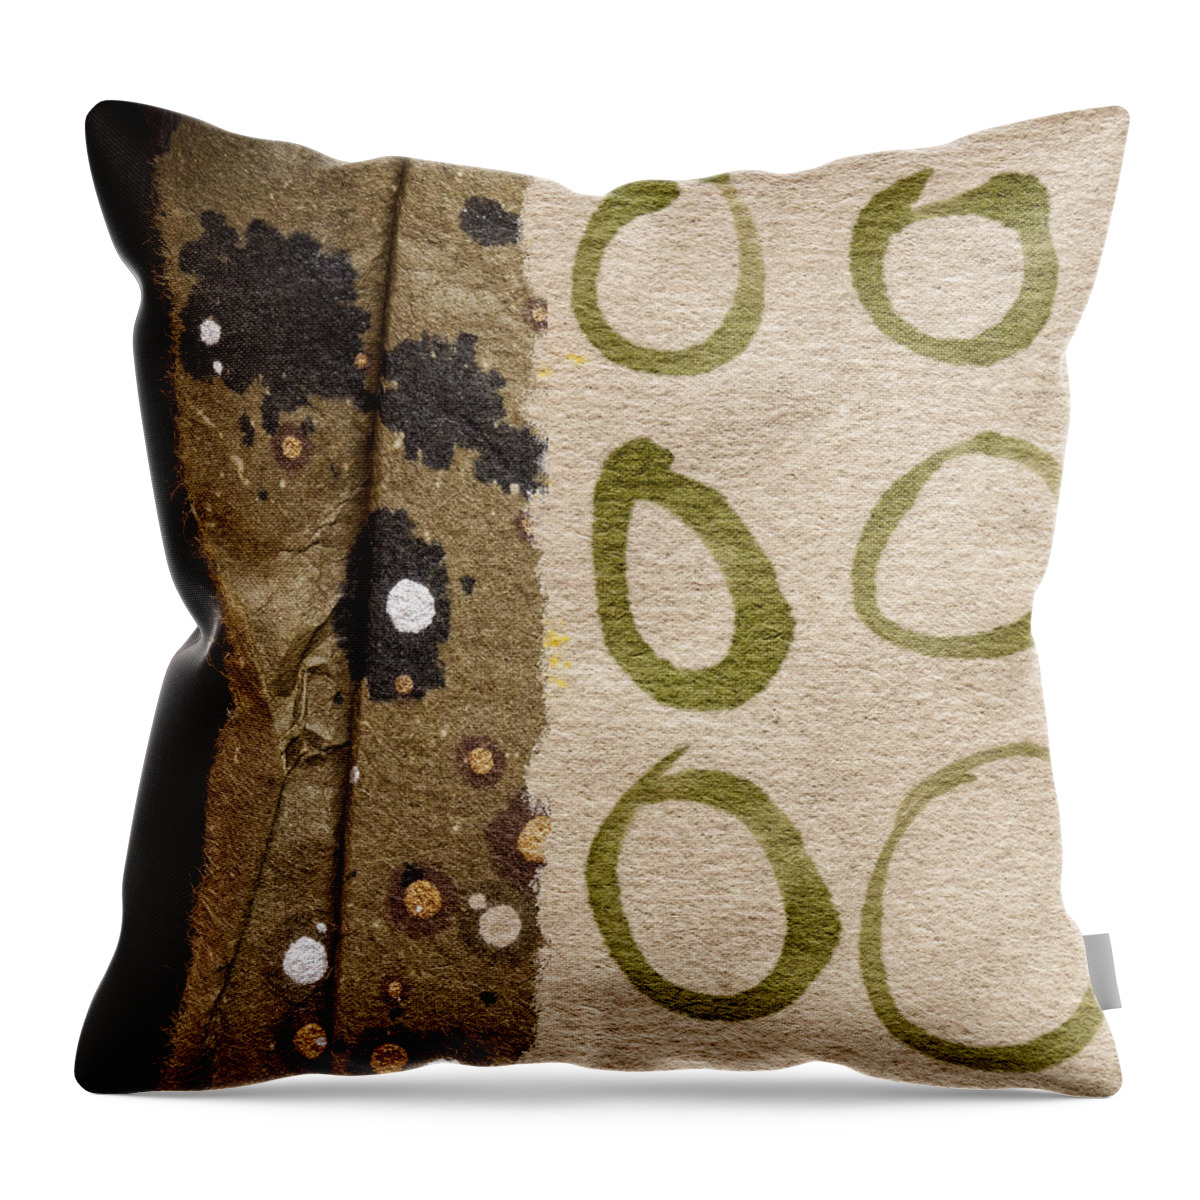 Collage Throw Pillow featuring the photograph Circle Collage by Carol Leigh